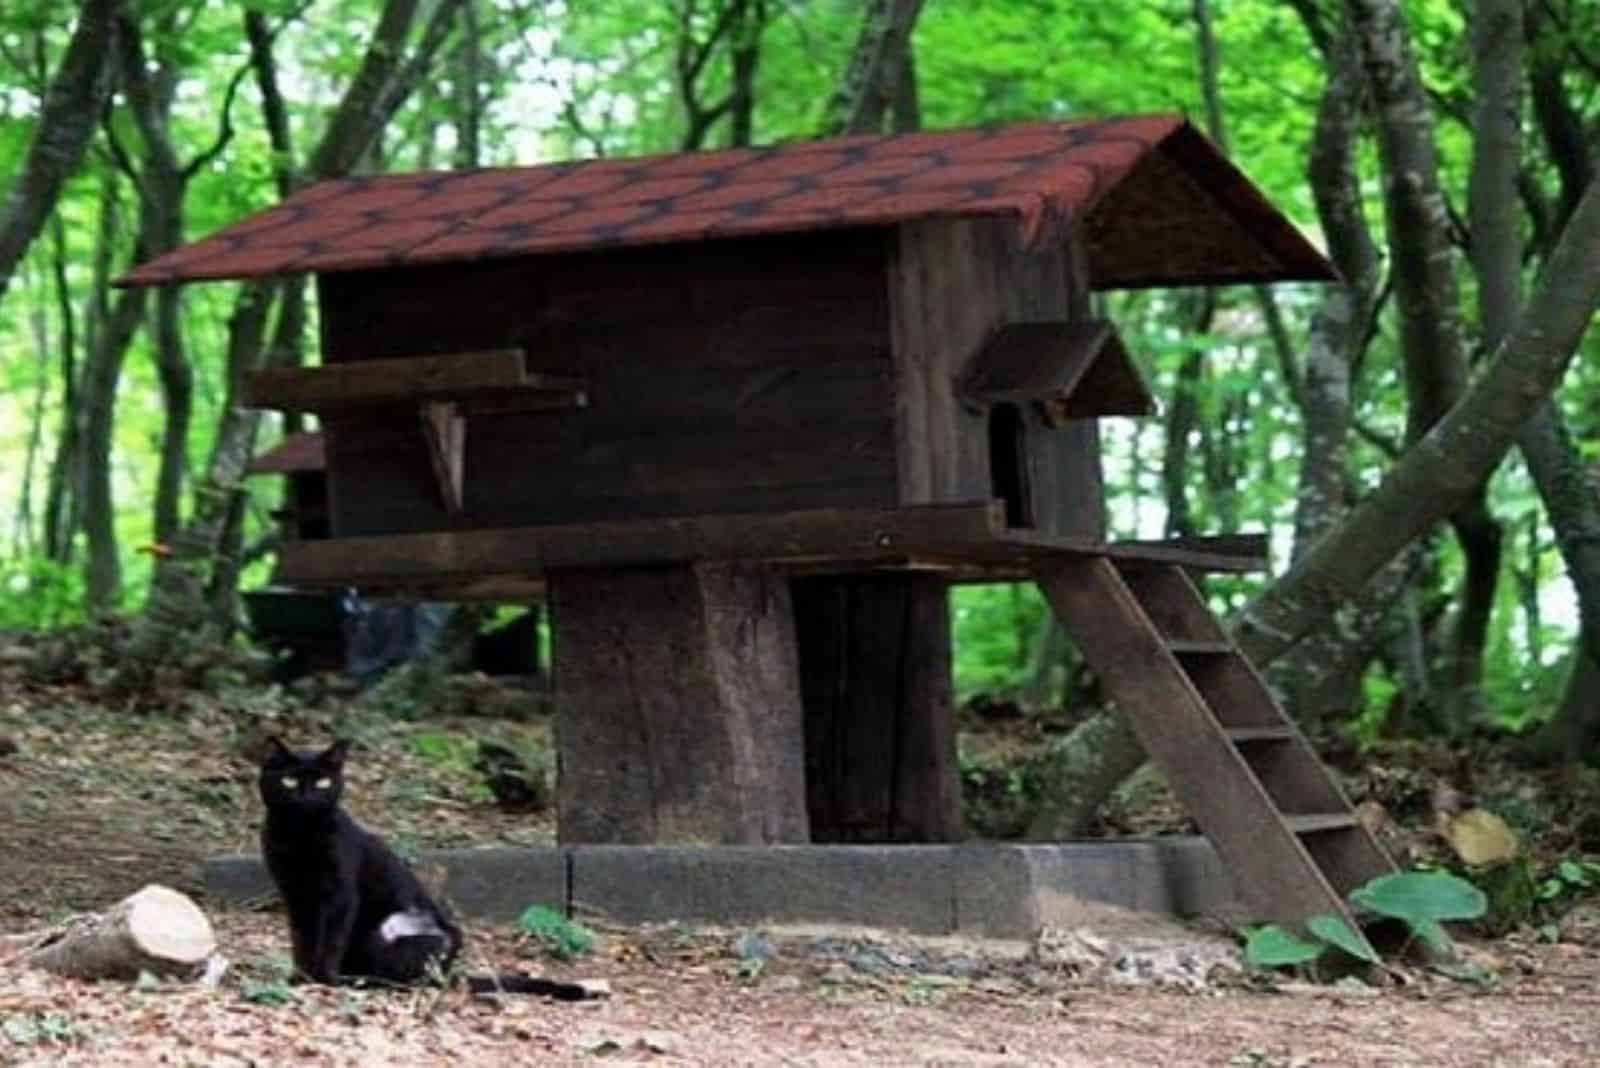 photo of a black cat in the shelter